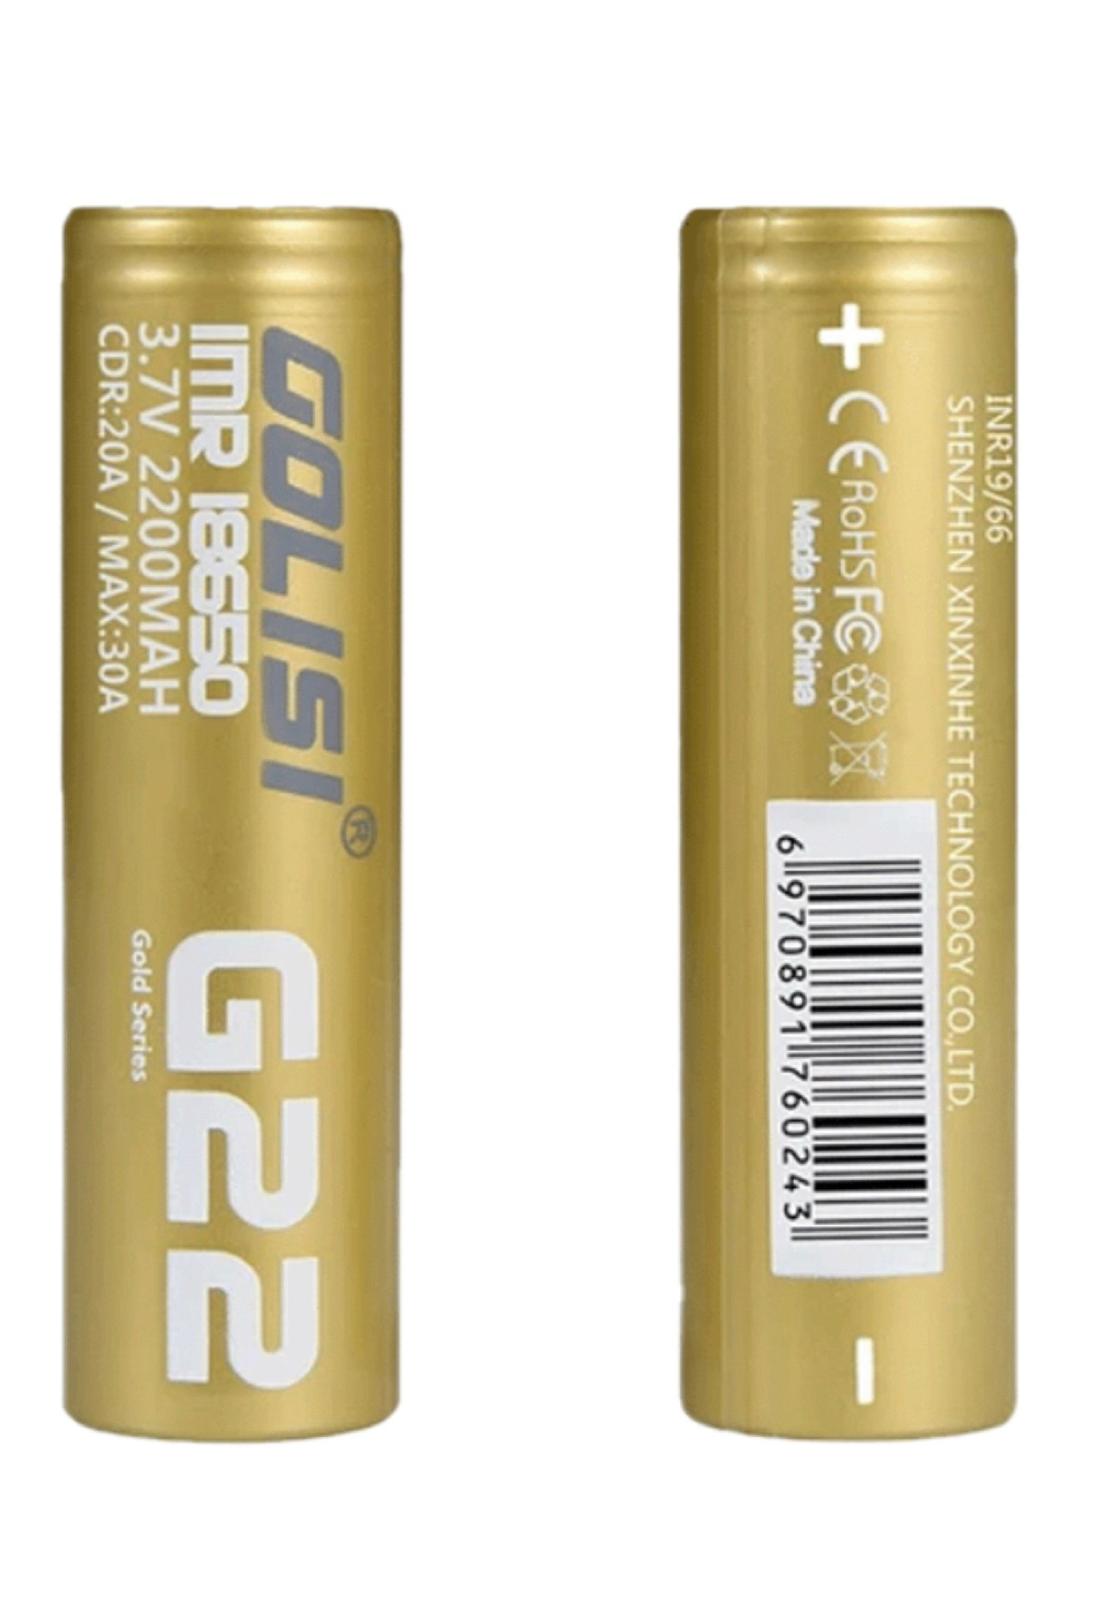 GOLISI 18650 G22 Twin Battery Pack